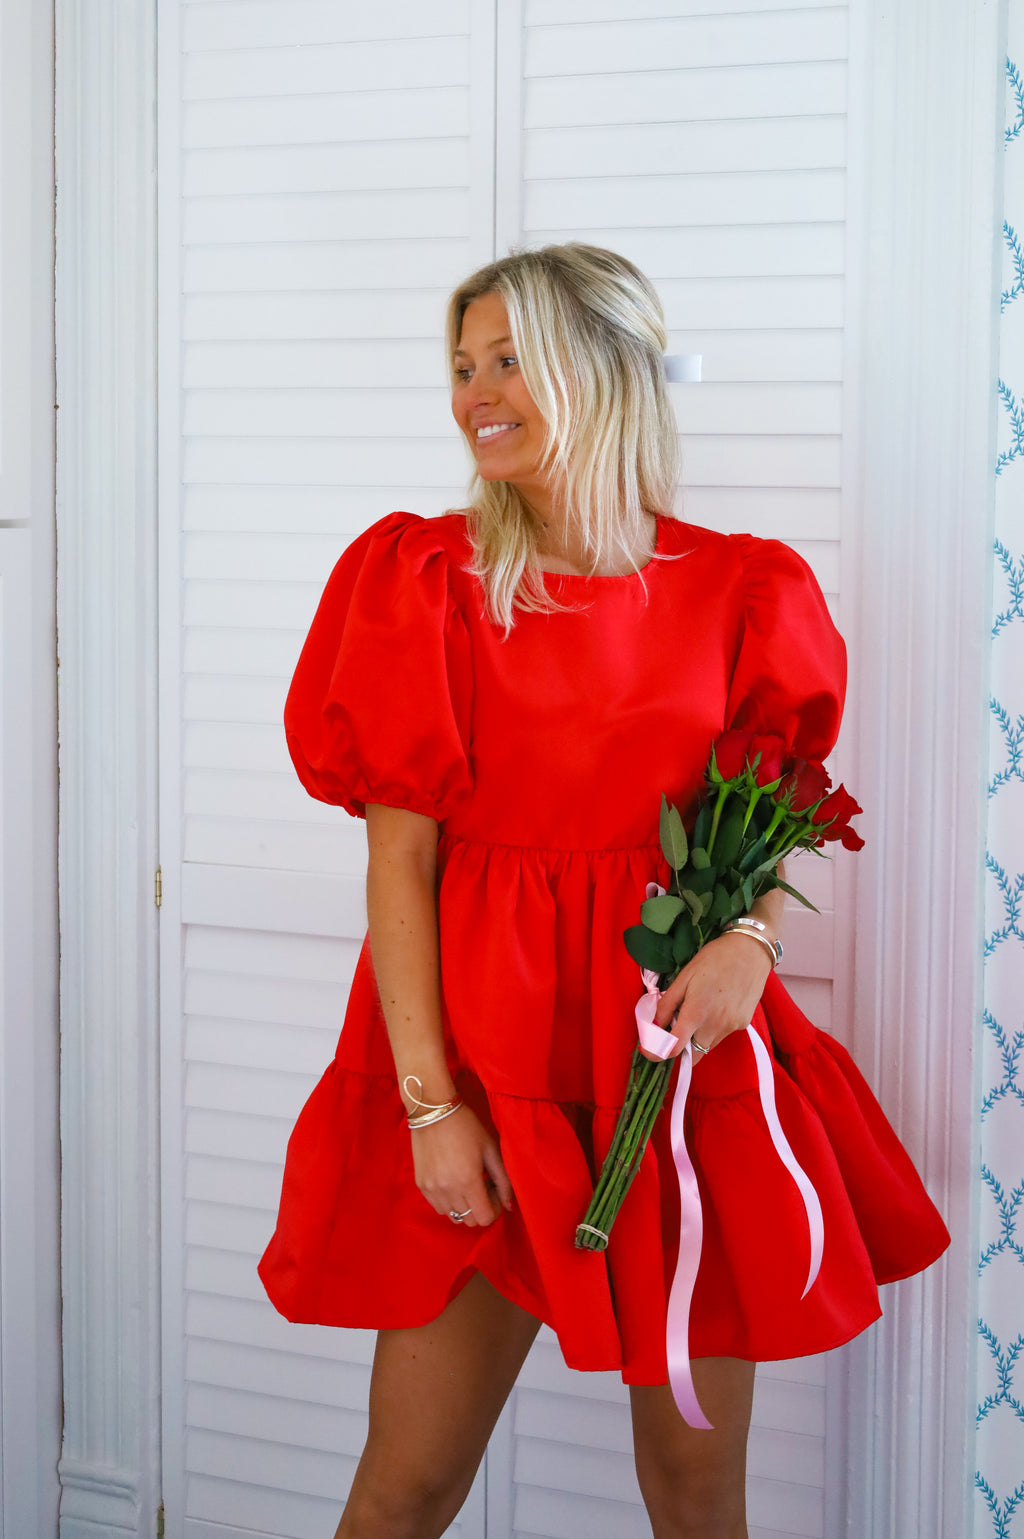 SATIN PUFF SLEEVE DRESS IN CANDY RED